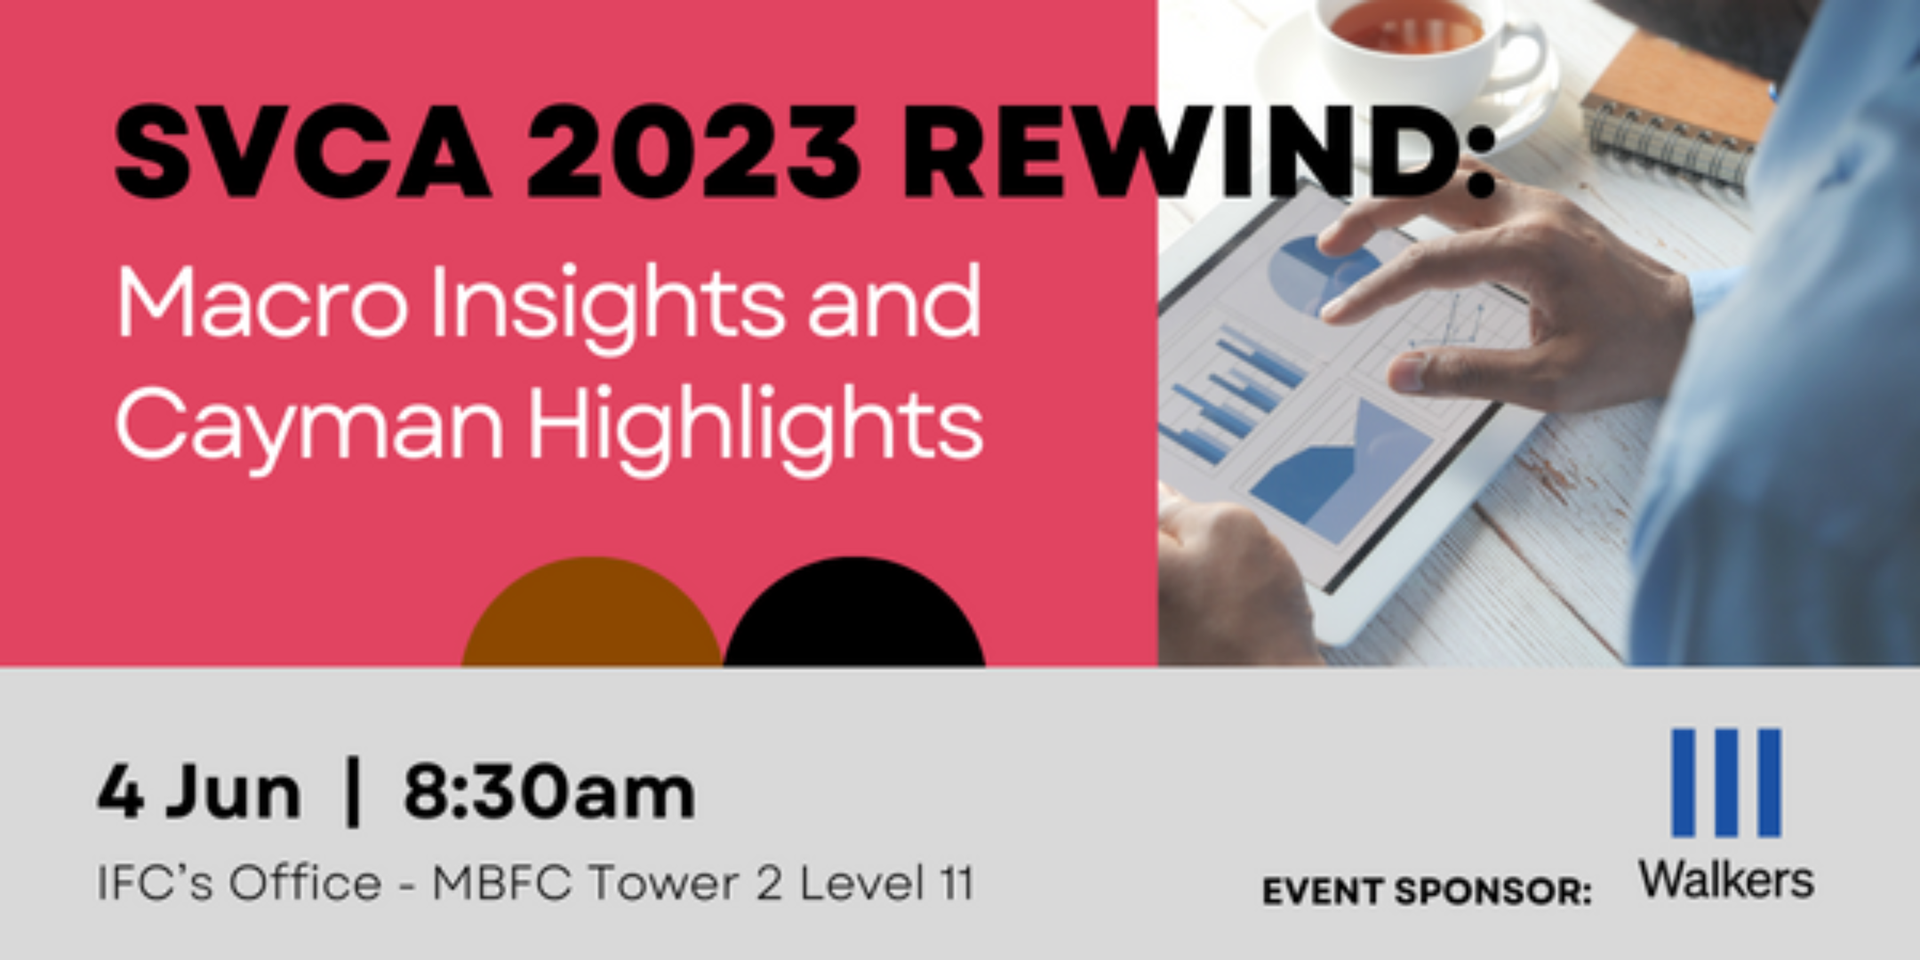 thumbnails 2023 Rewind: Macro Insights and Cayman Highlights